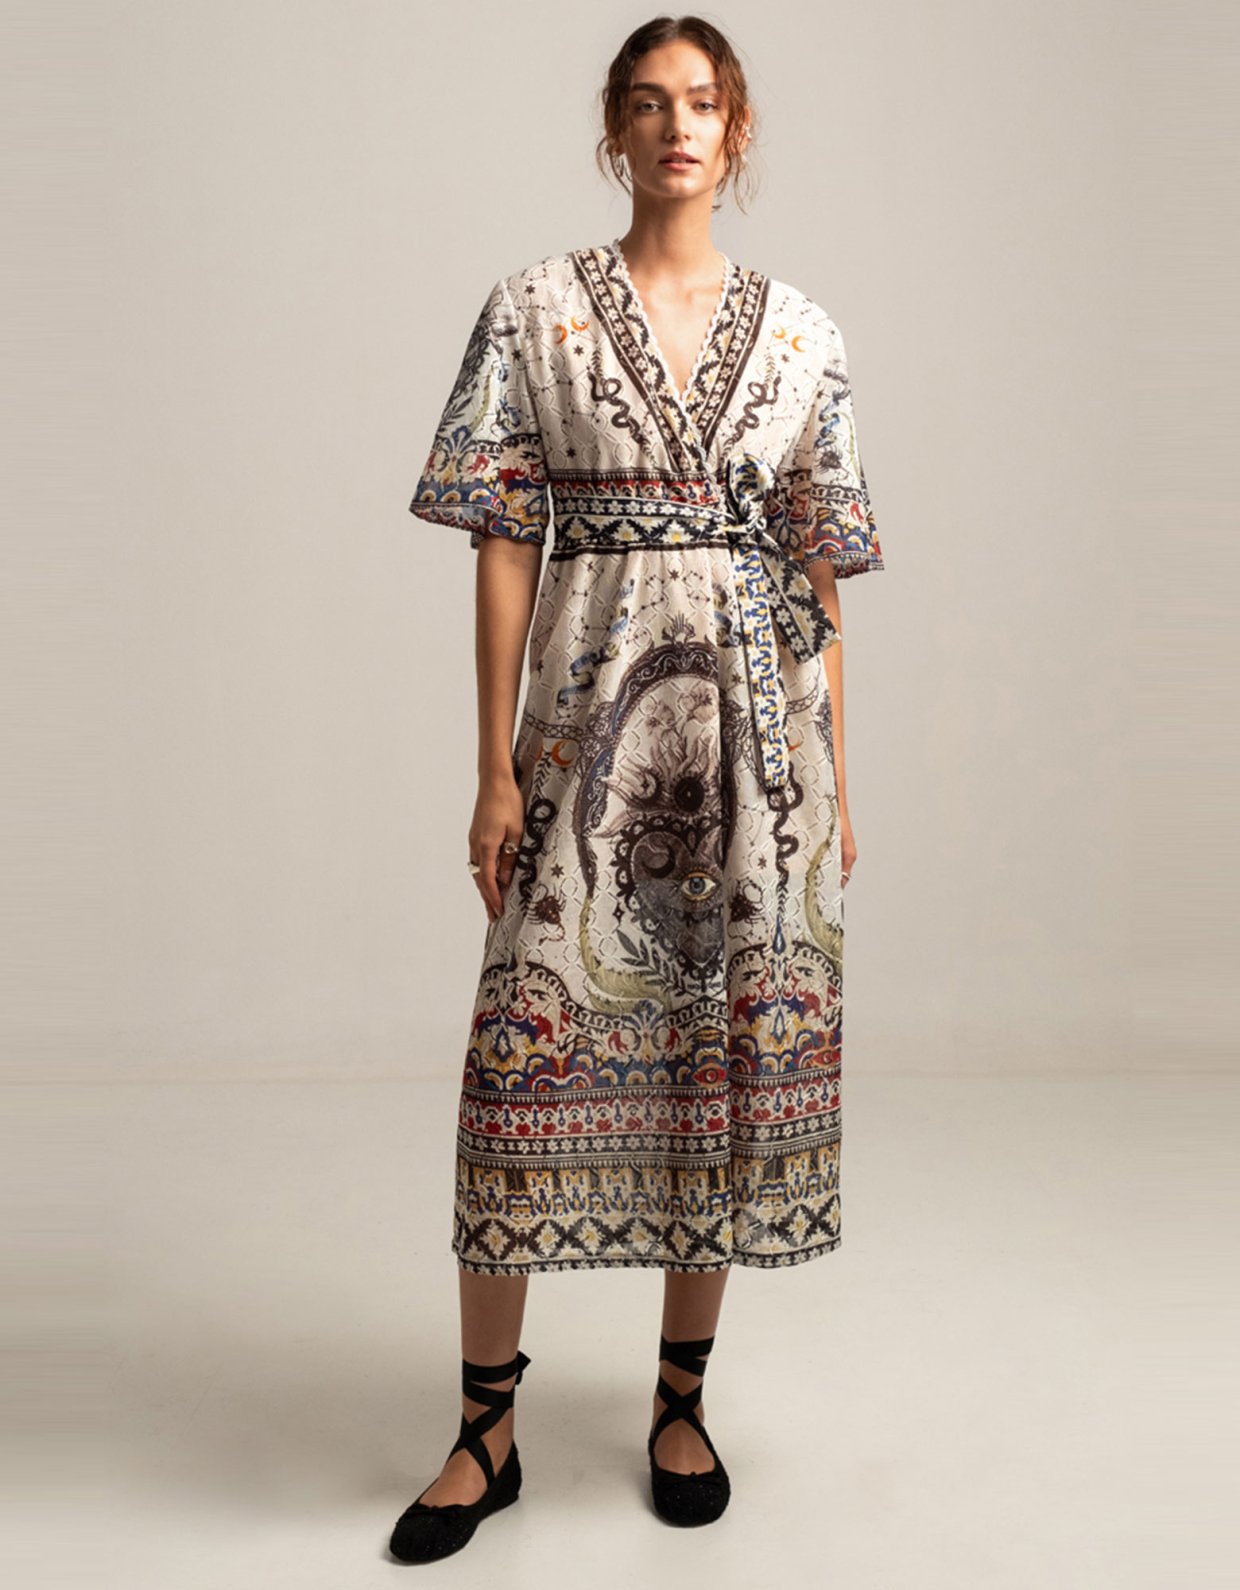 Peace & Chaos Broderie dress